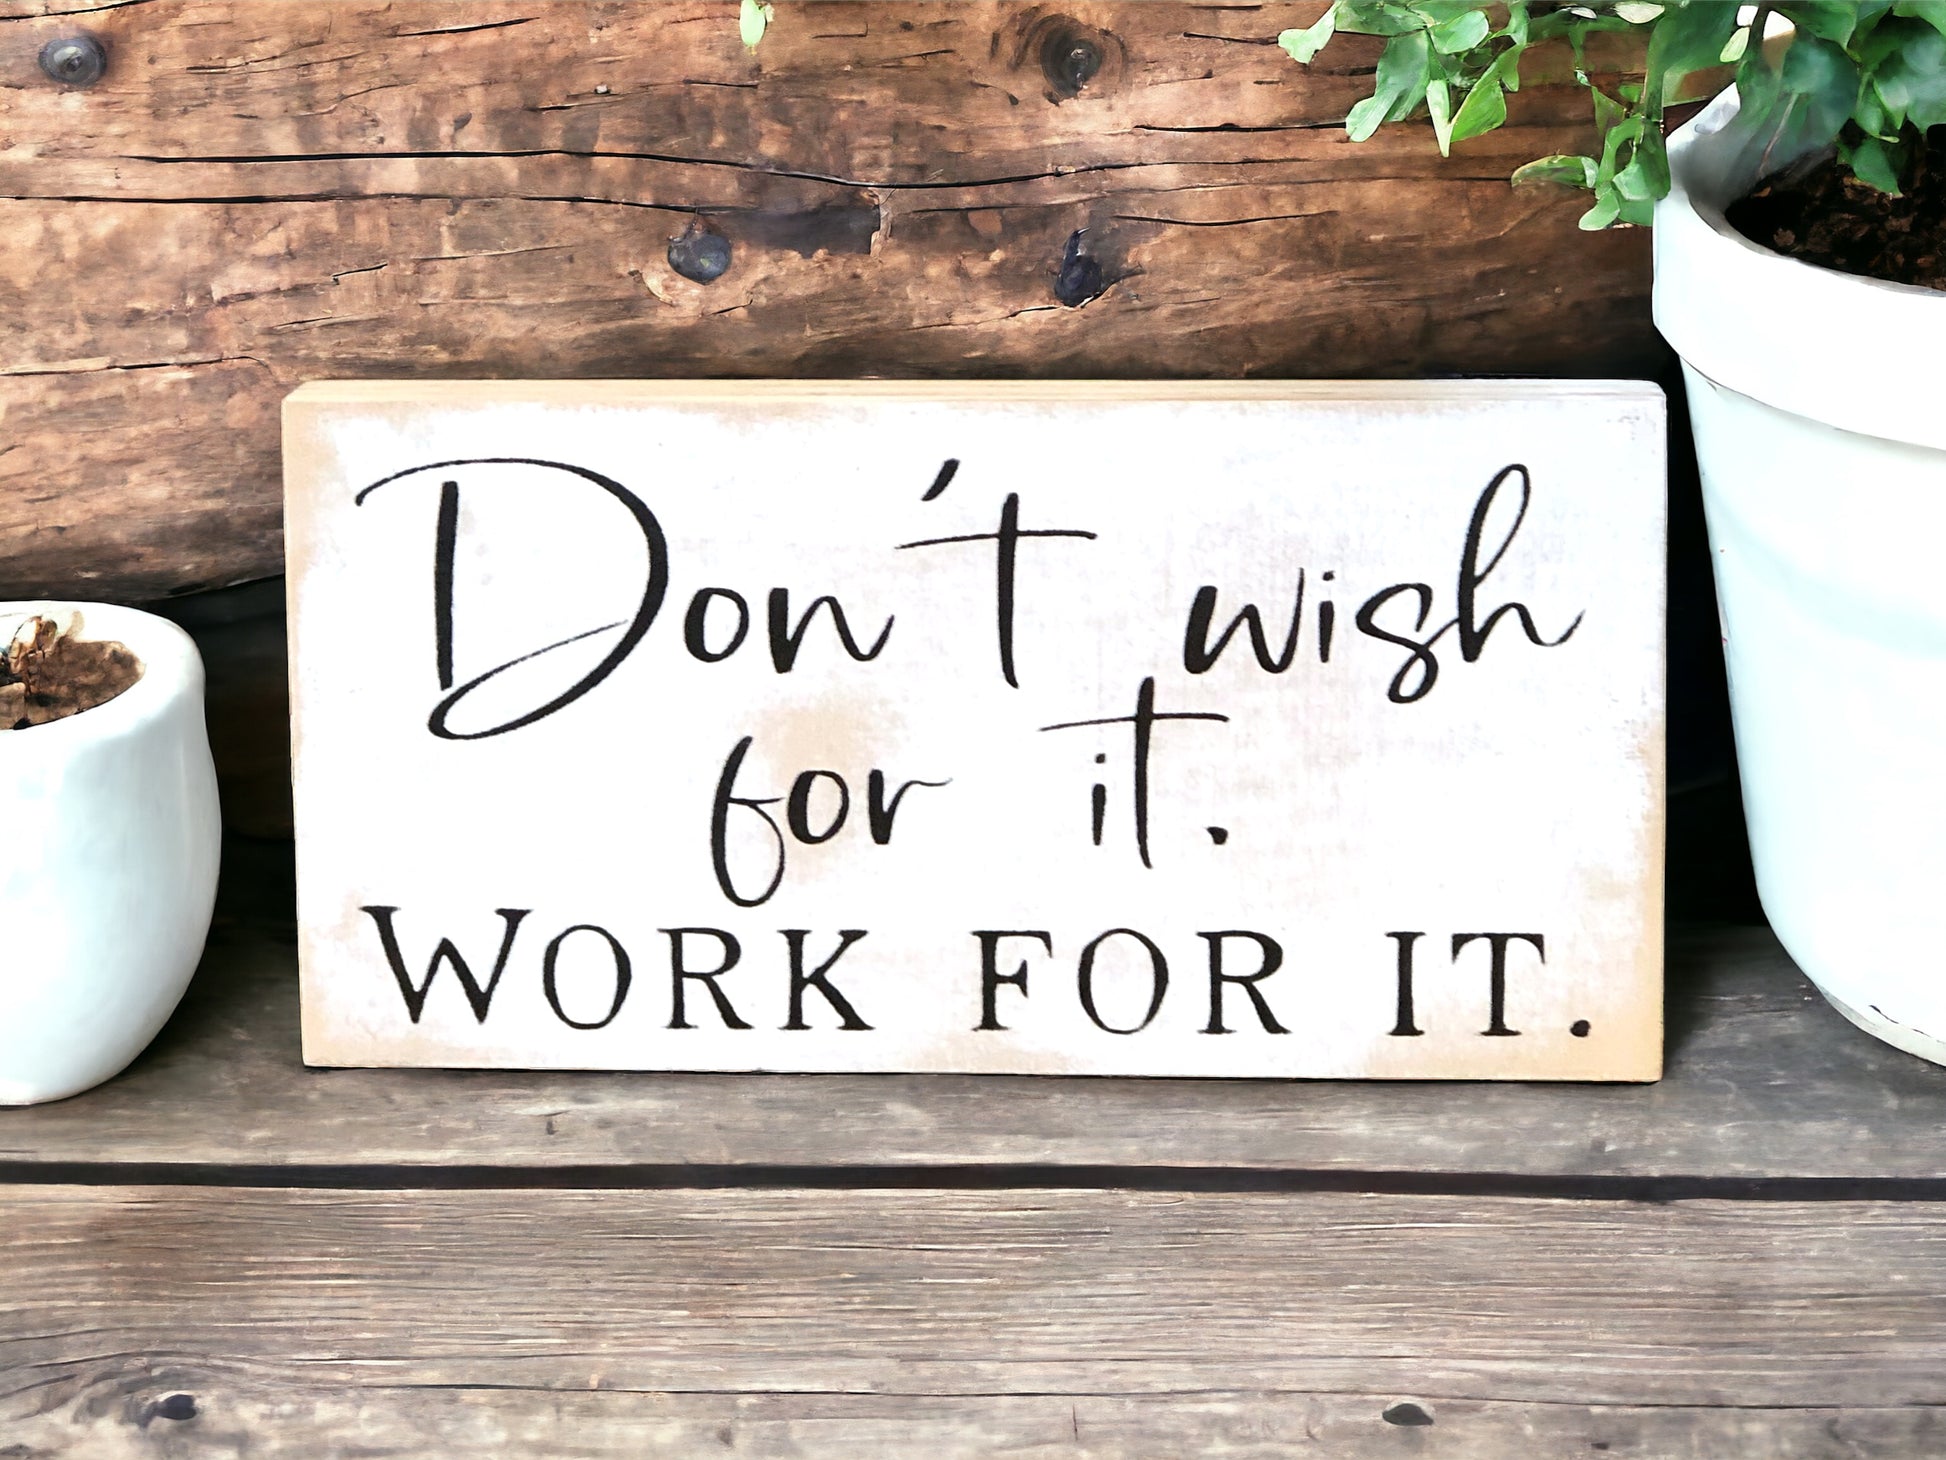 "Don't wish for it" wood sign